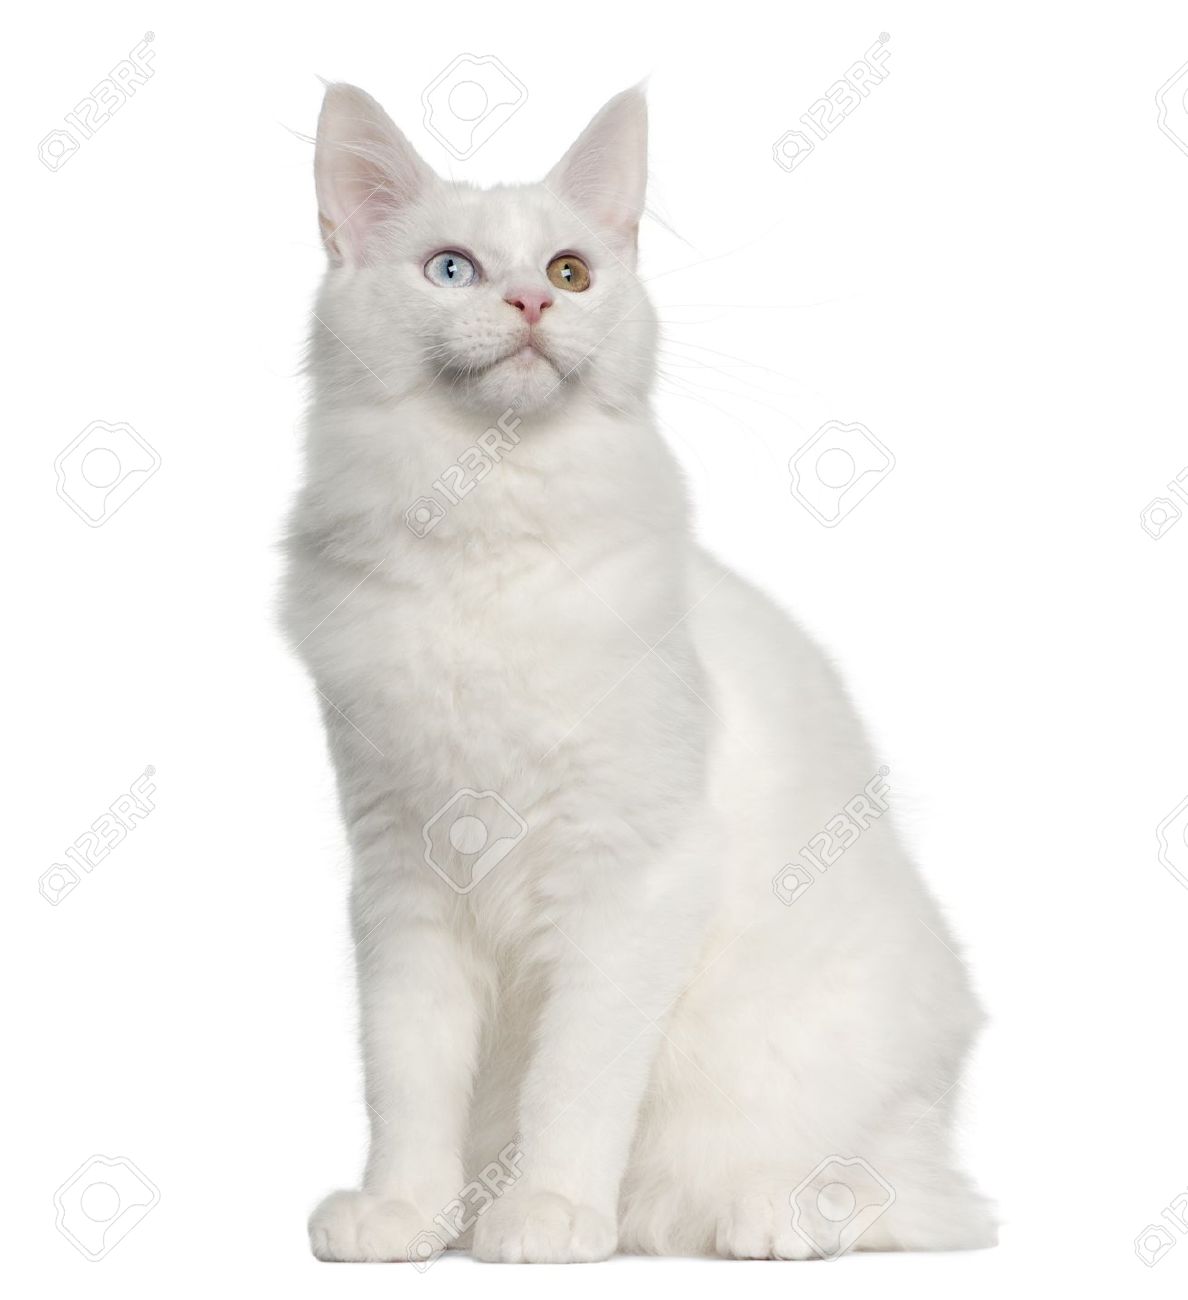 5 Months Old White Maine Coon Cat